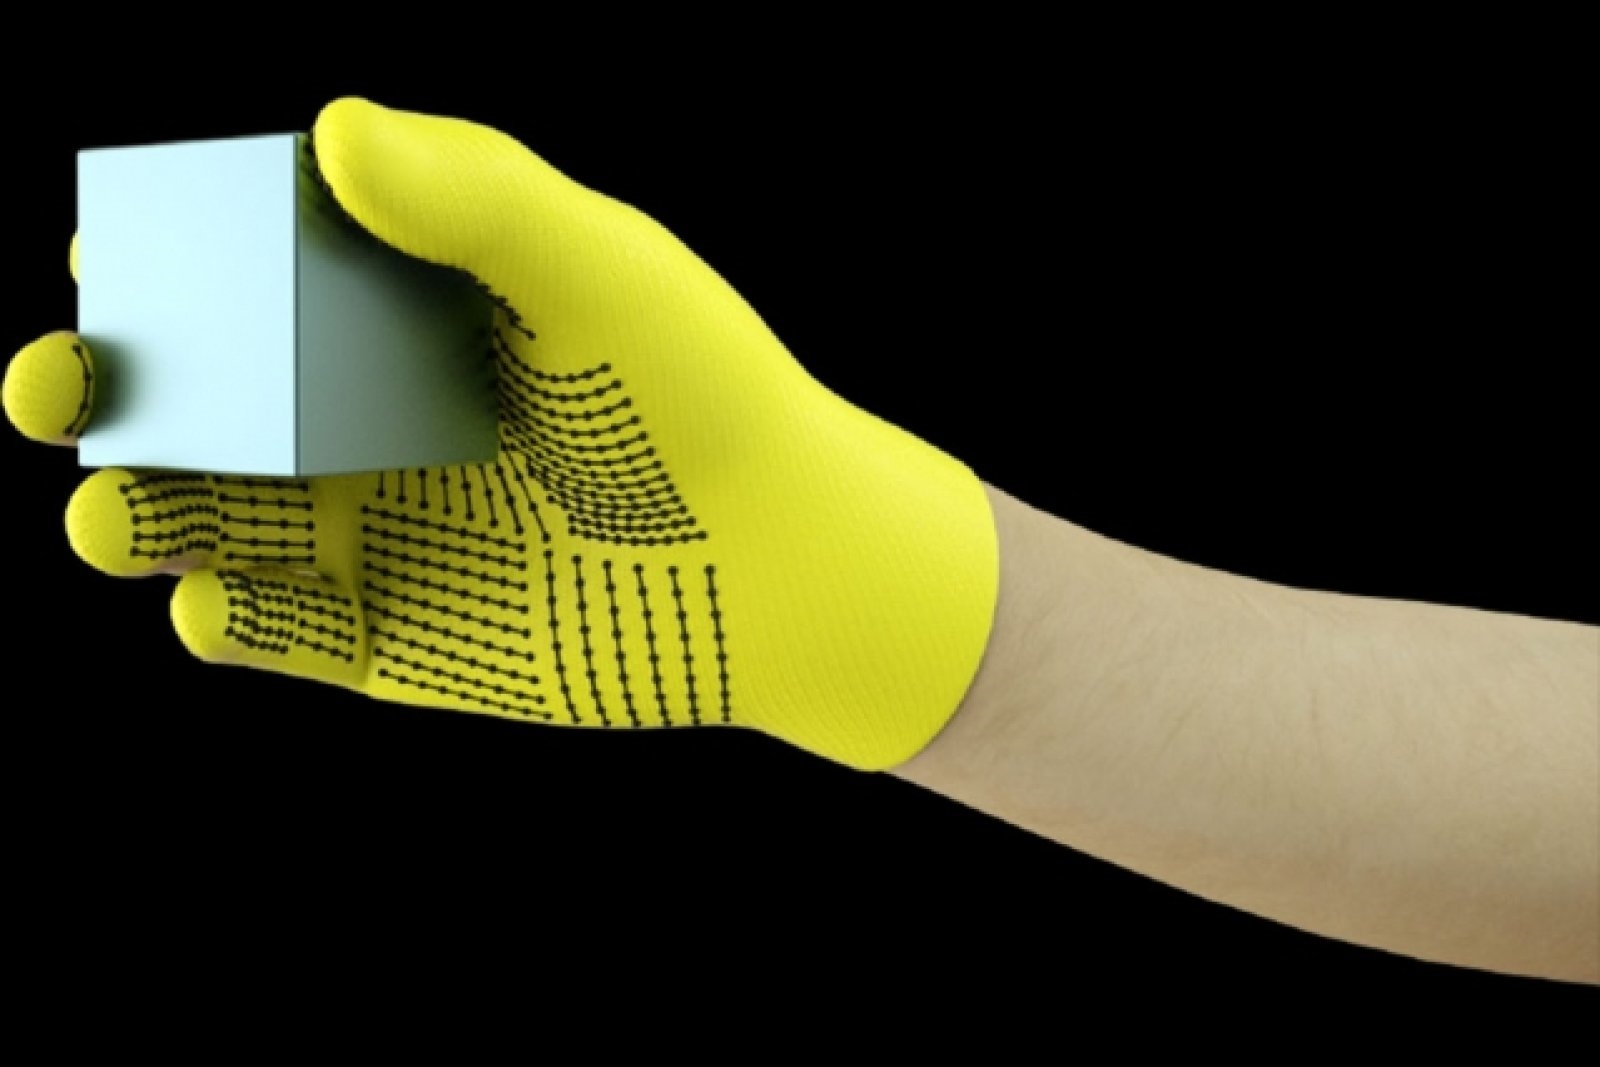 MIT’s sensor-packed glove helps AI identify objects by touch | DeviceDaily.com